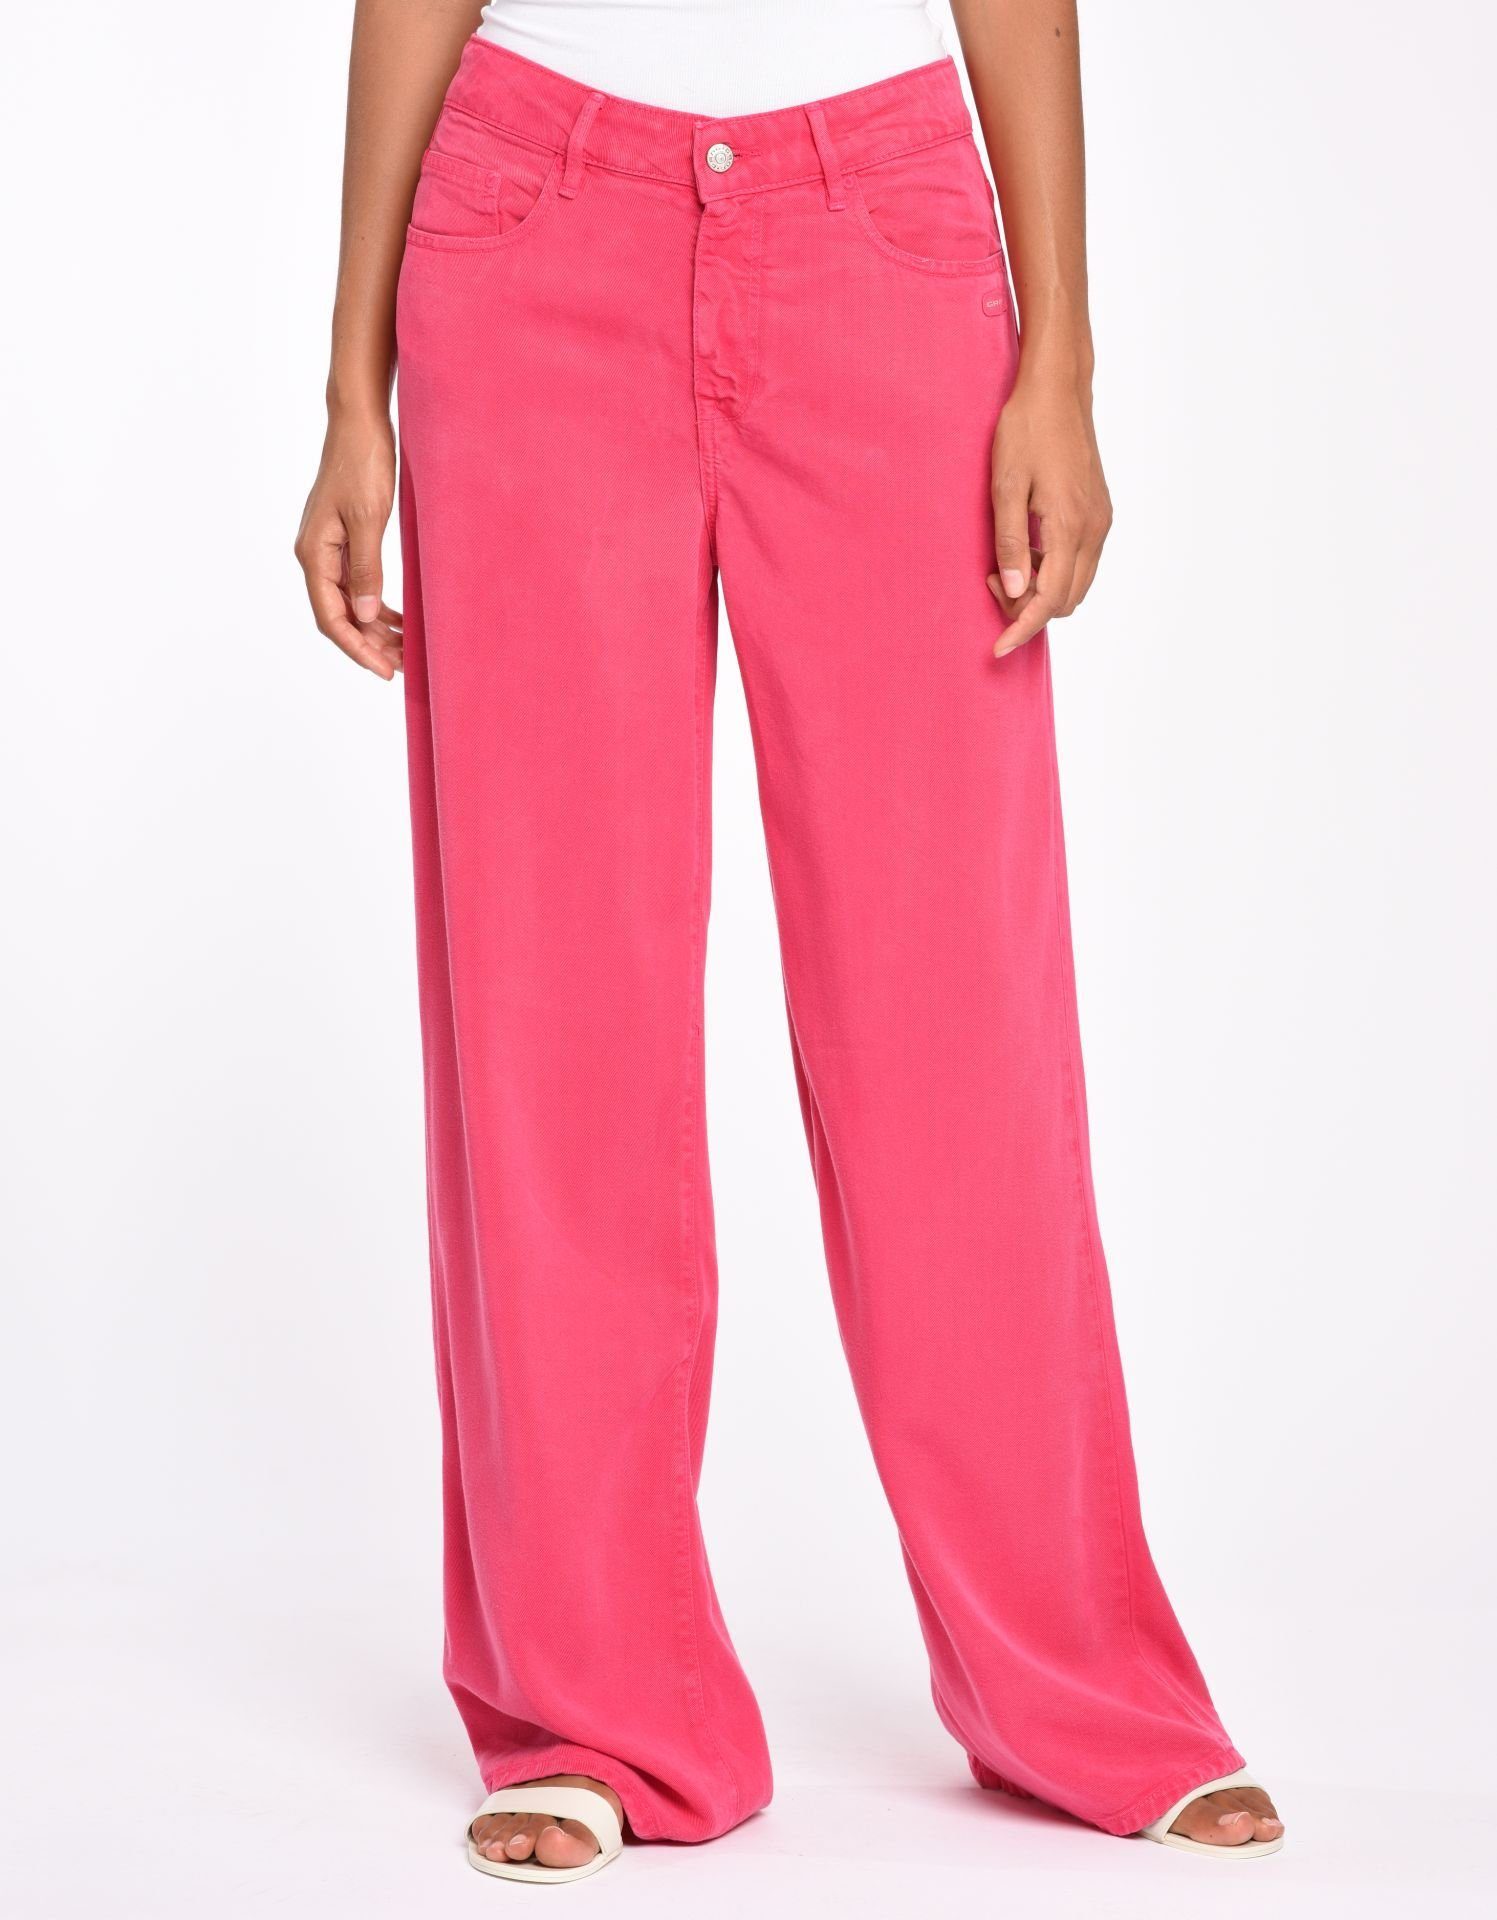 GANG Weite Jeans 6359 pink fuxia | Weite Jeans